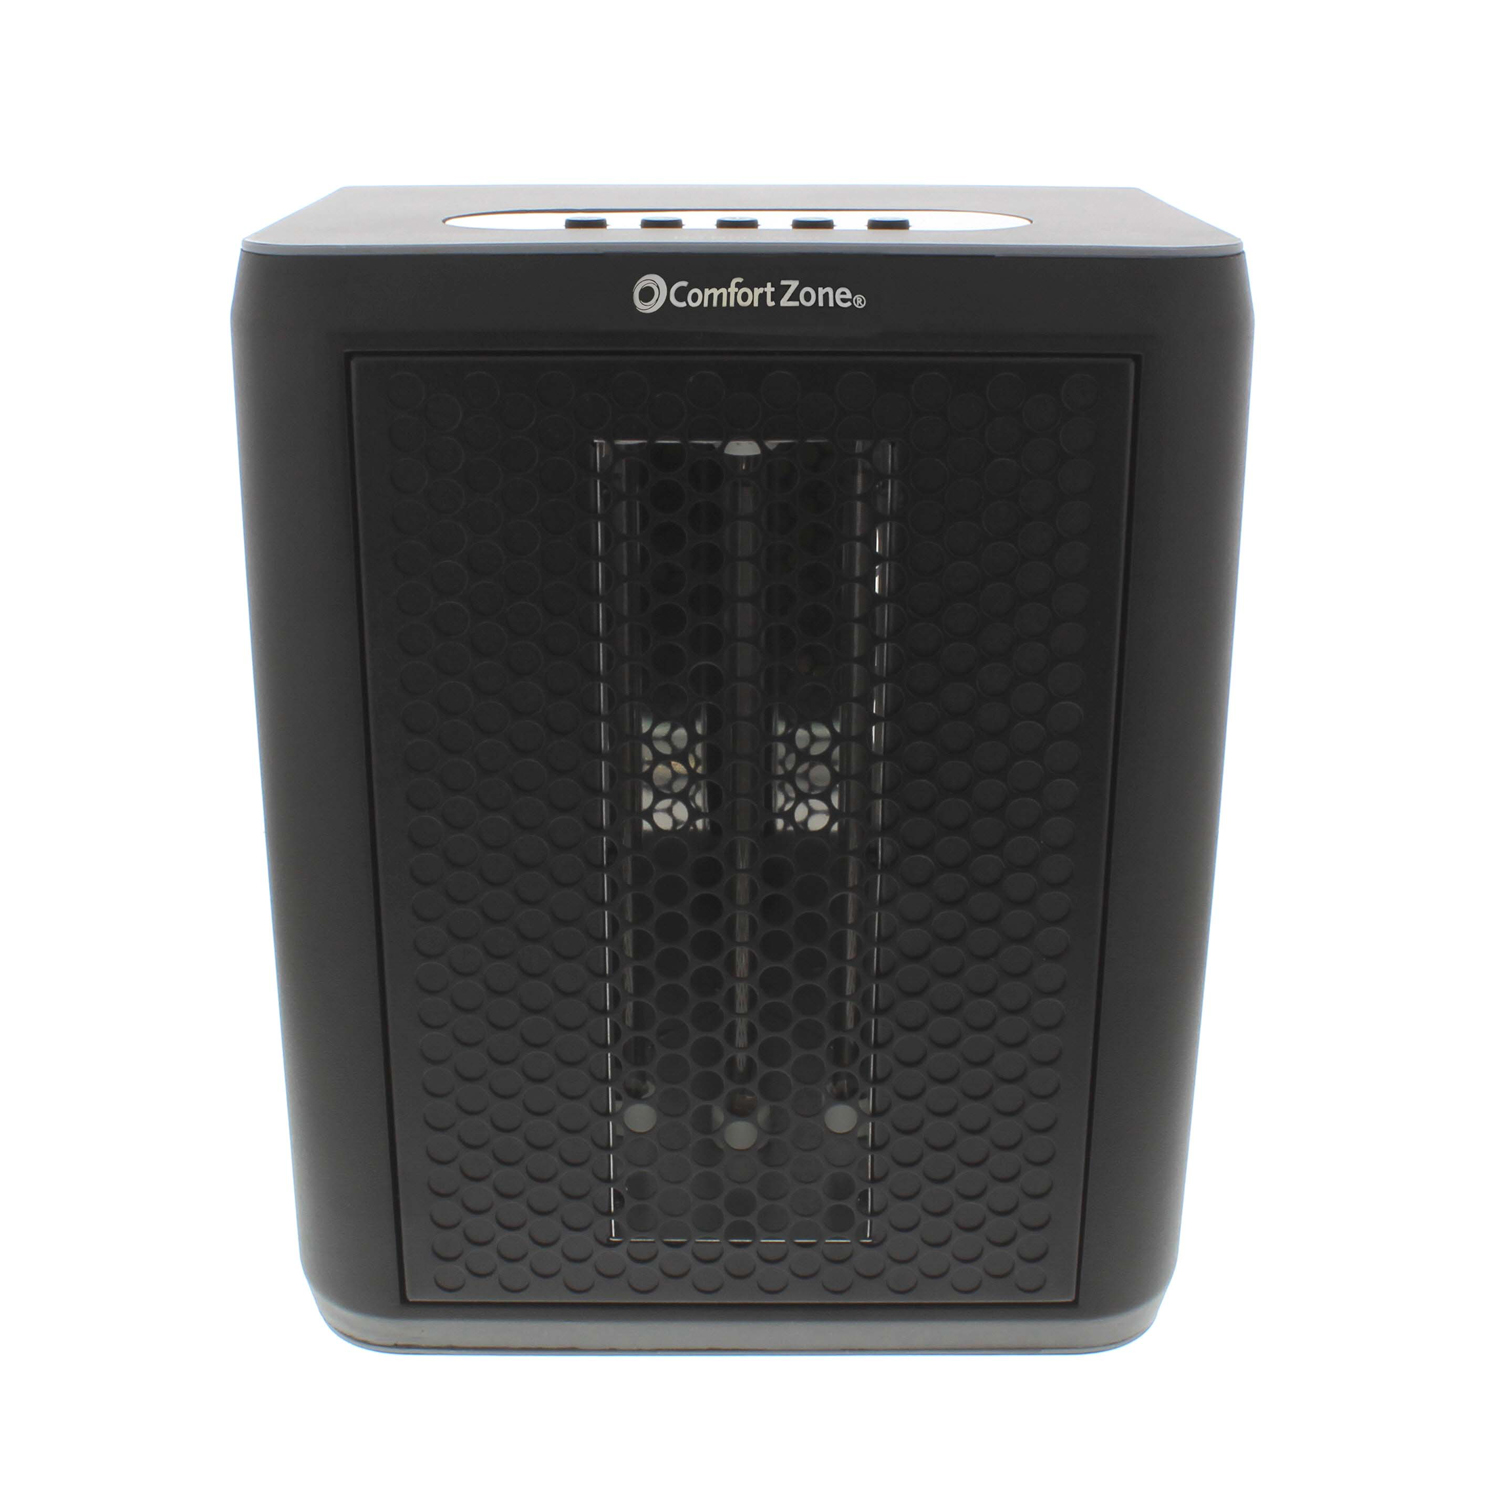 Comfort Zone Infrared Electric Portable Desktop Space Heater, Black - image 1 of 4